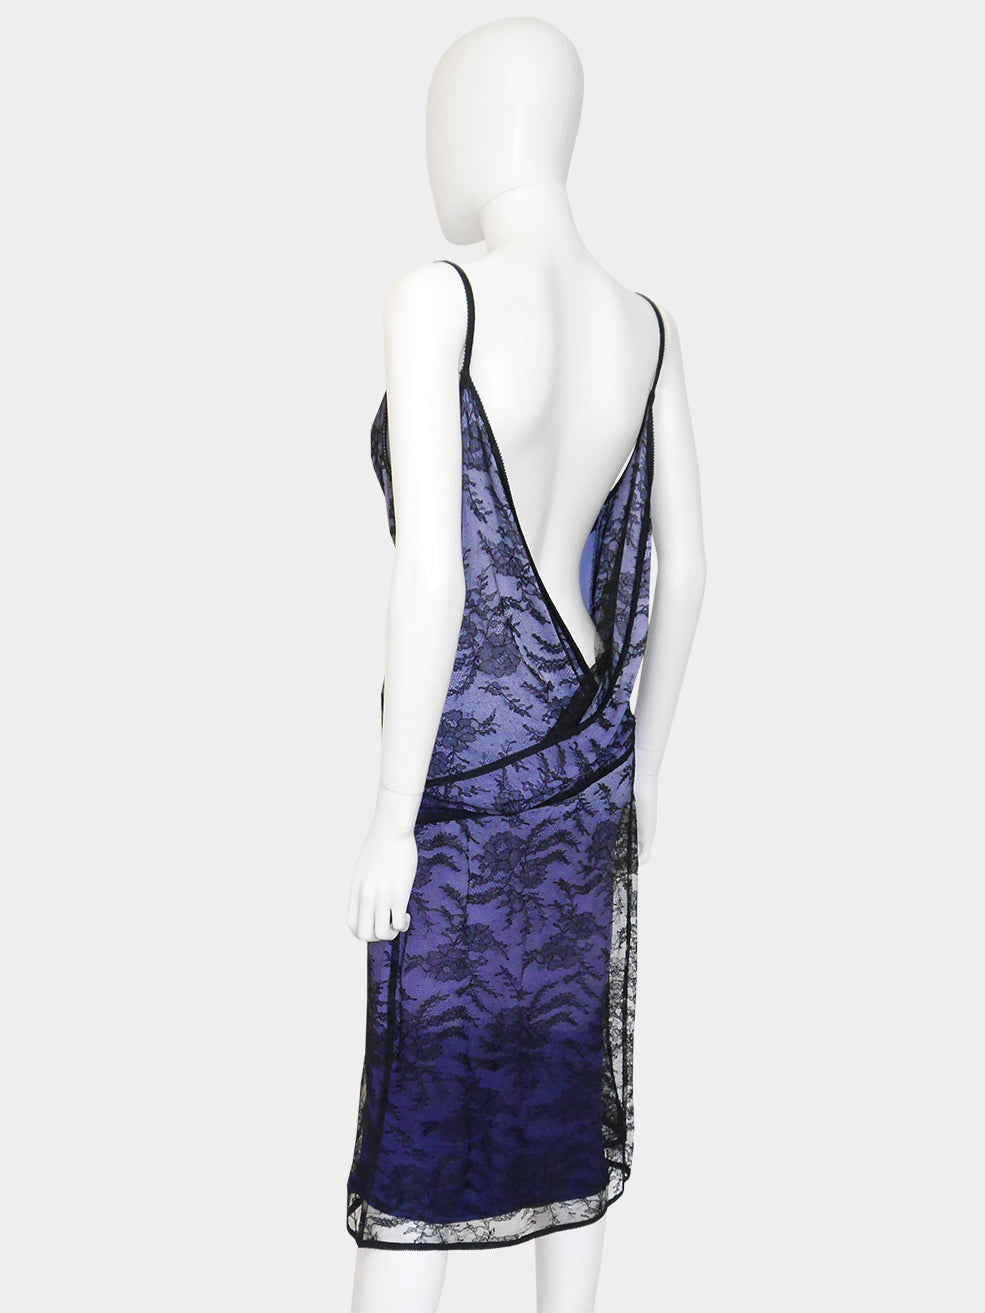 JOHN GALLIANO Fall 1998 Vintage Backless Ombré Lace Evening Dress Size M